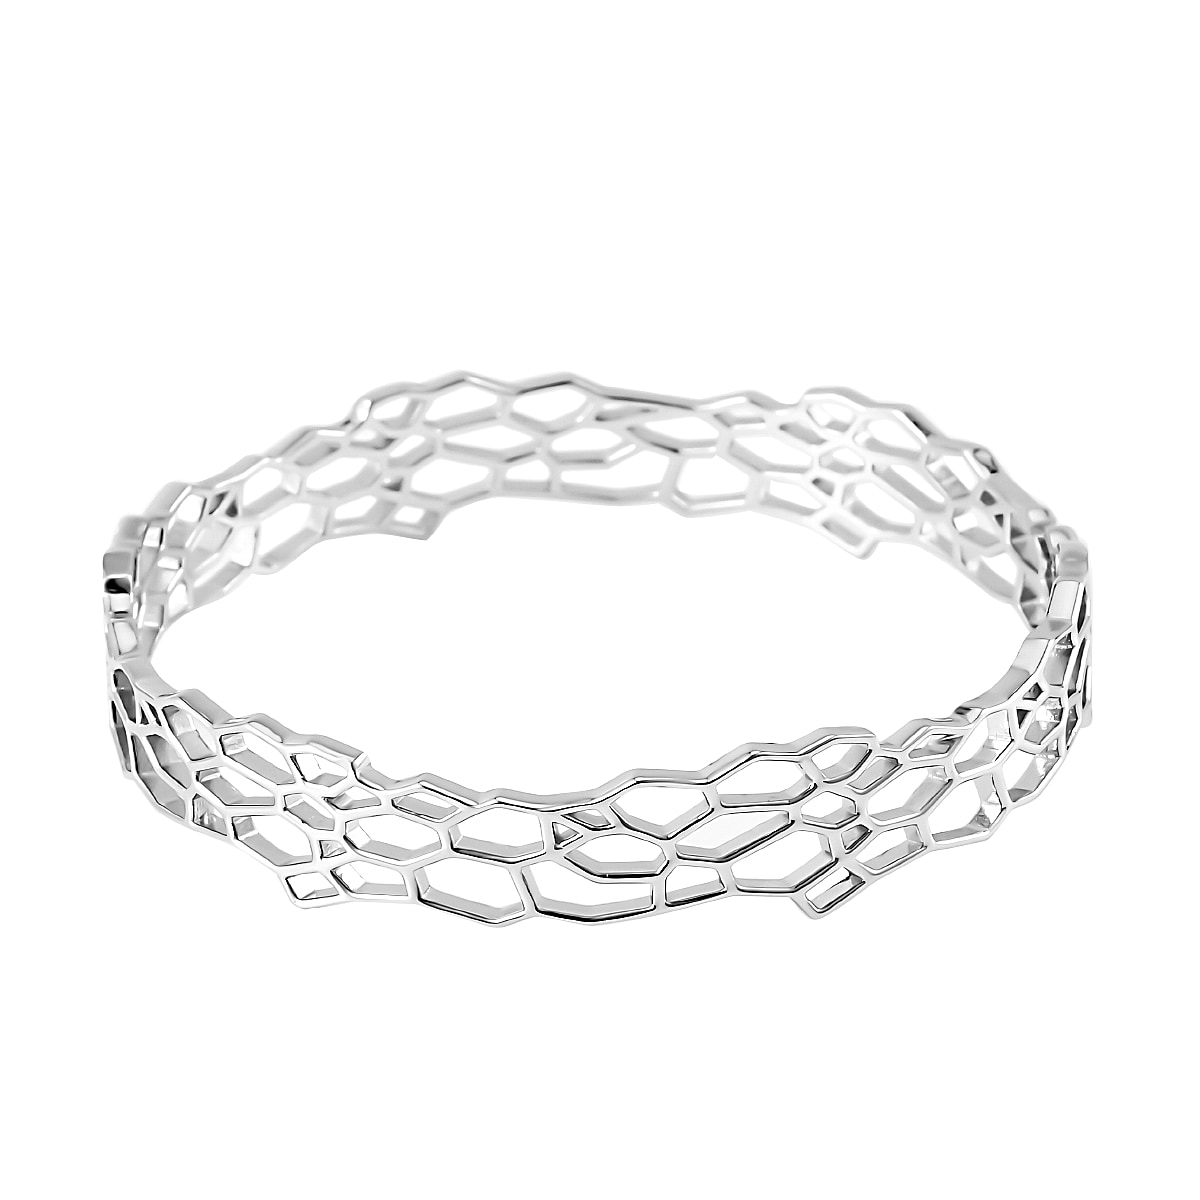 Lucy Q Honeycomb Collection - Rhodium Overlay Sterling Silver Honeycomb Bangle (Size 7.5)